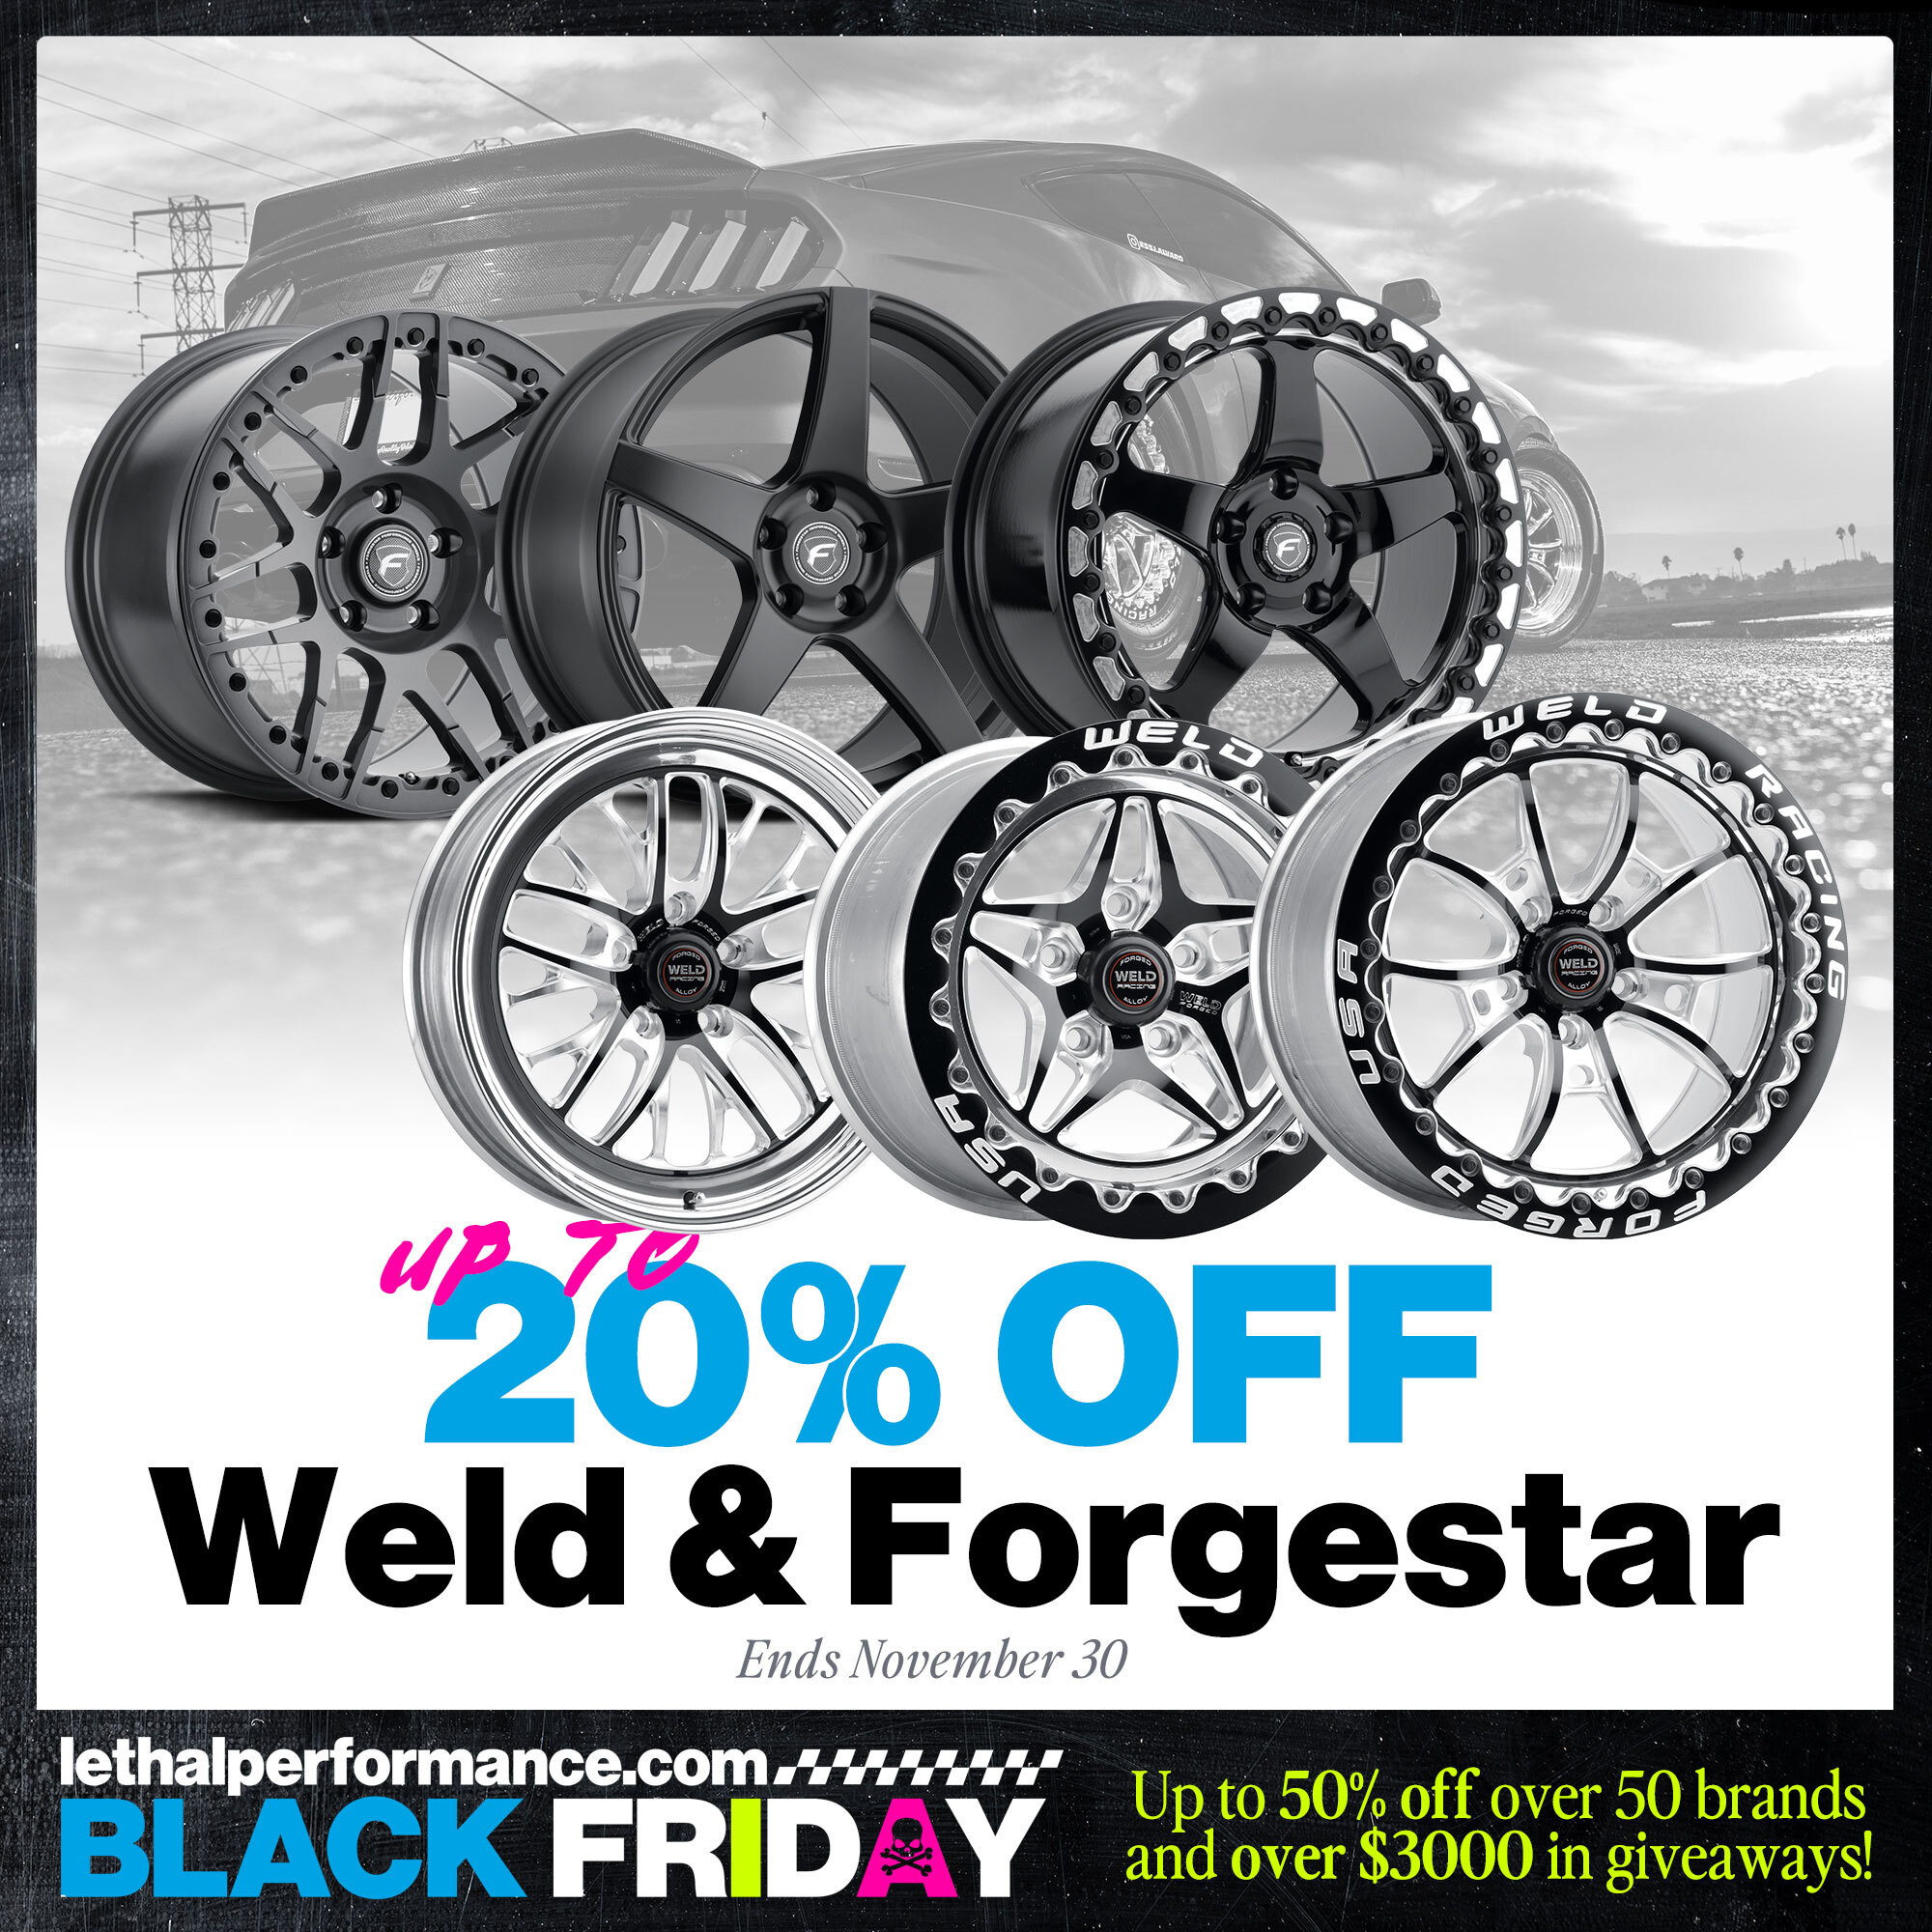 S650 Mustang Black Friday starts NOW! Up to 50% off! WeldForgestar